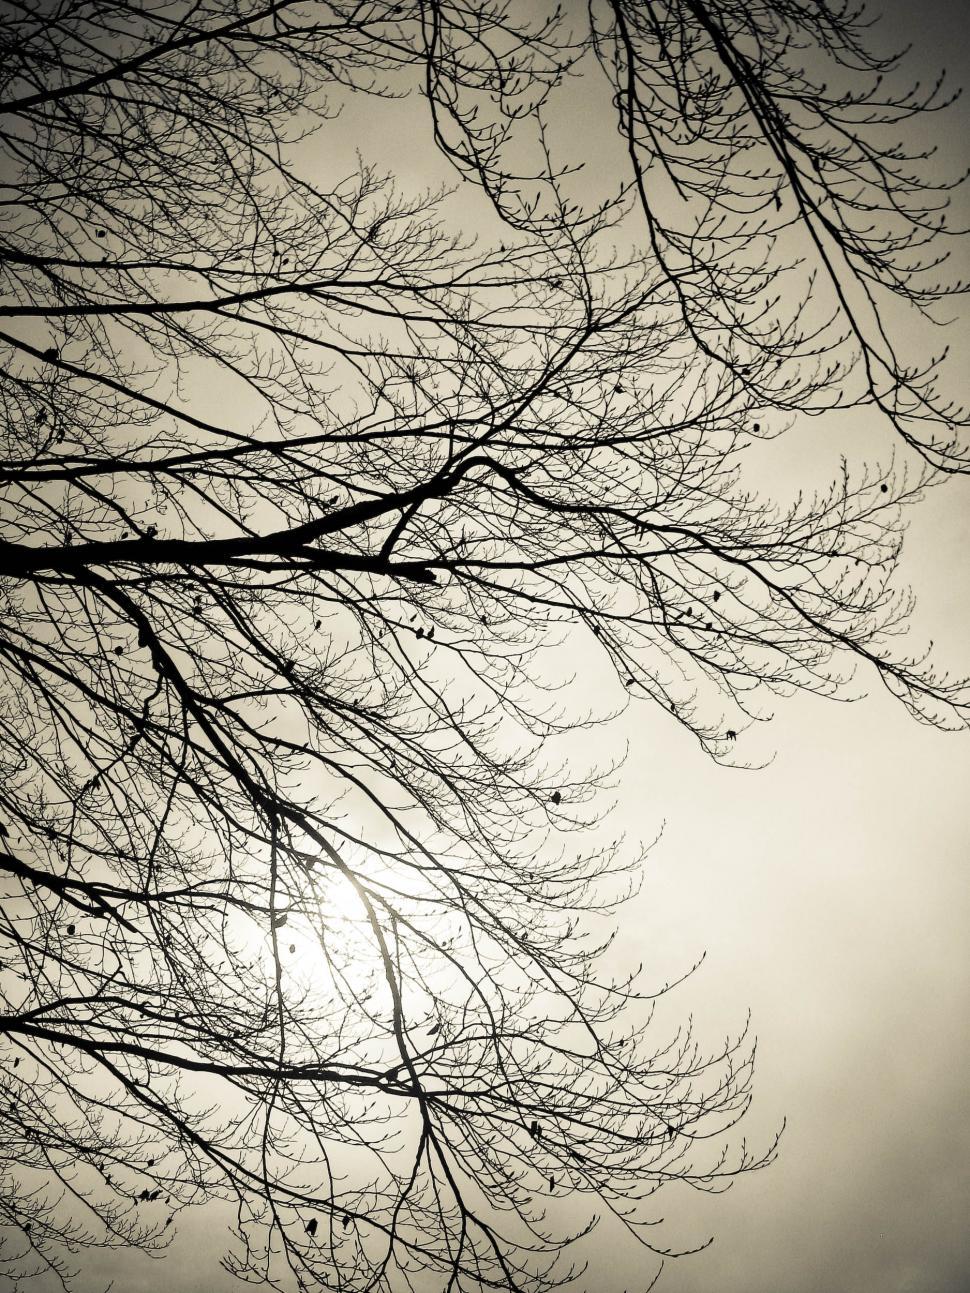 Download Free Stock Photo of dark tree branches 